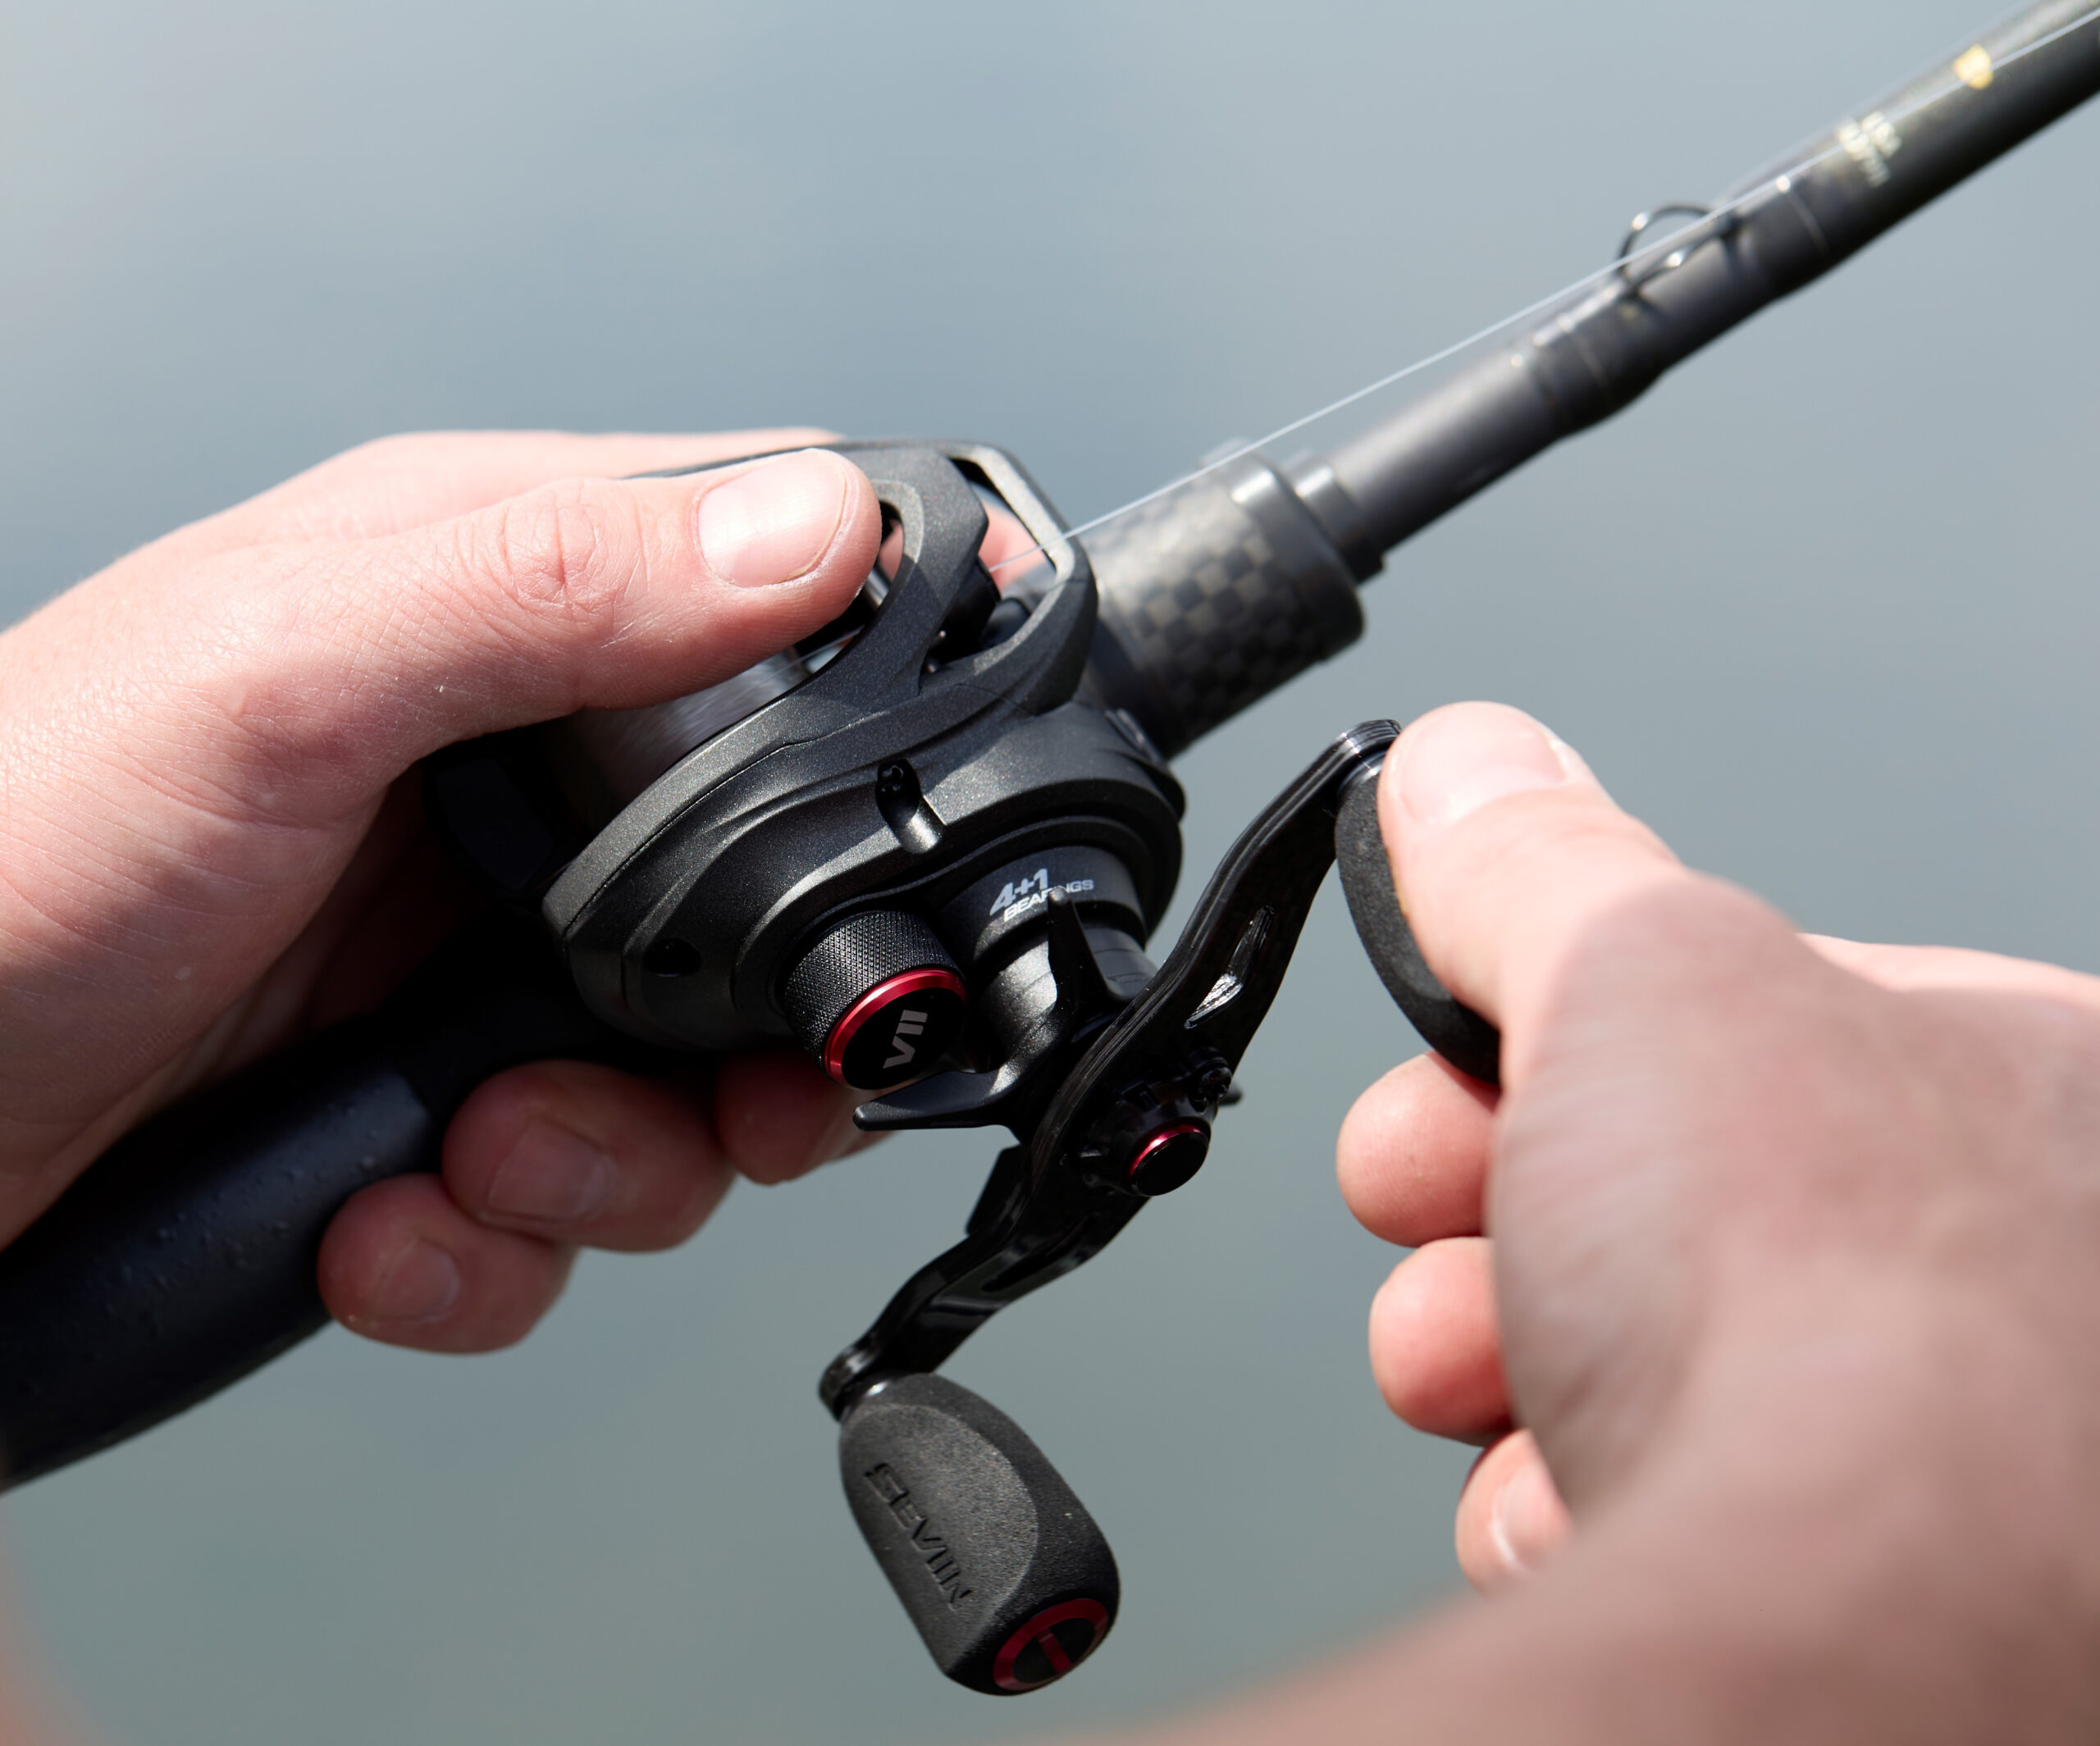 SEVIIN GF Series Reels: Reliability by Design, Durability Proven